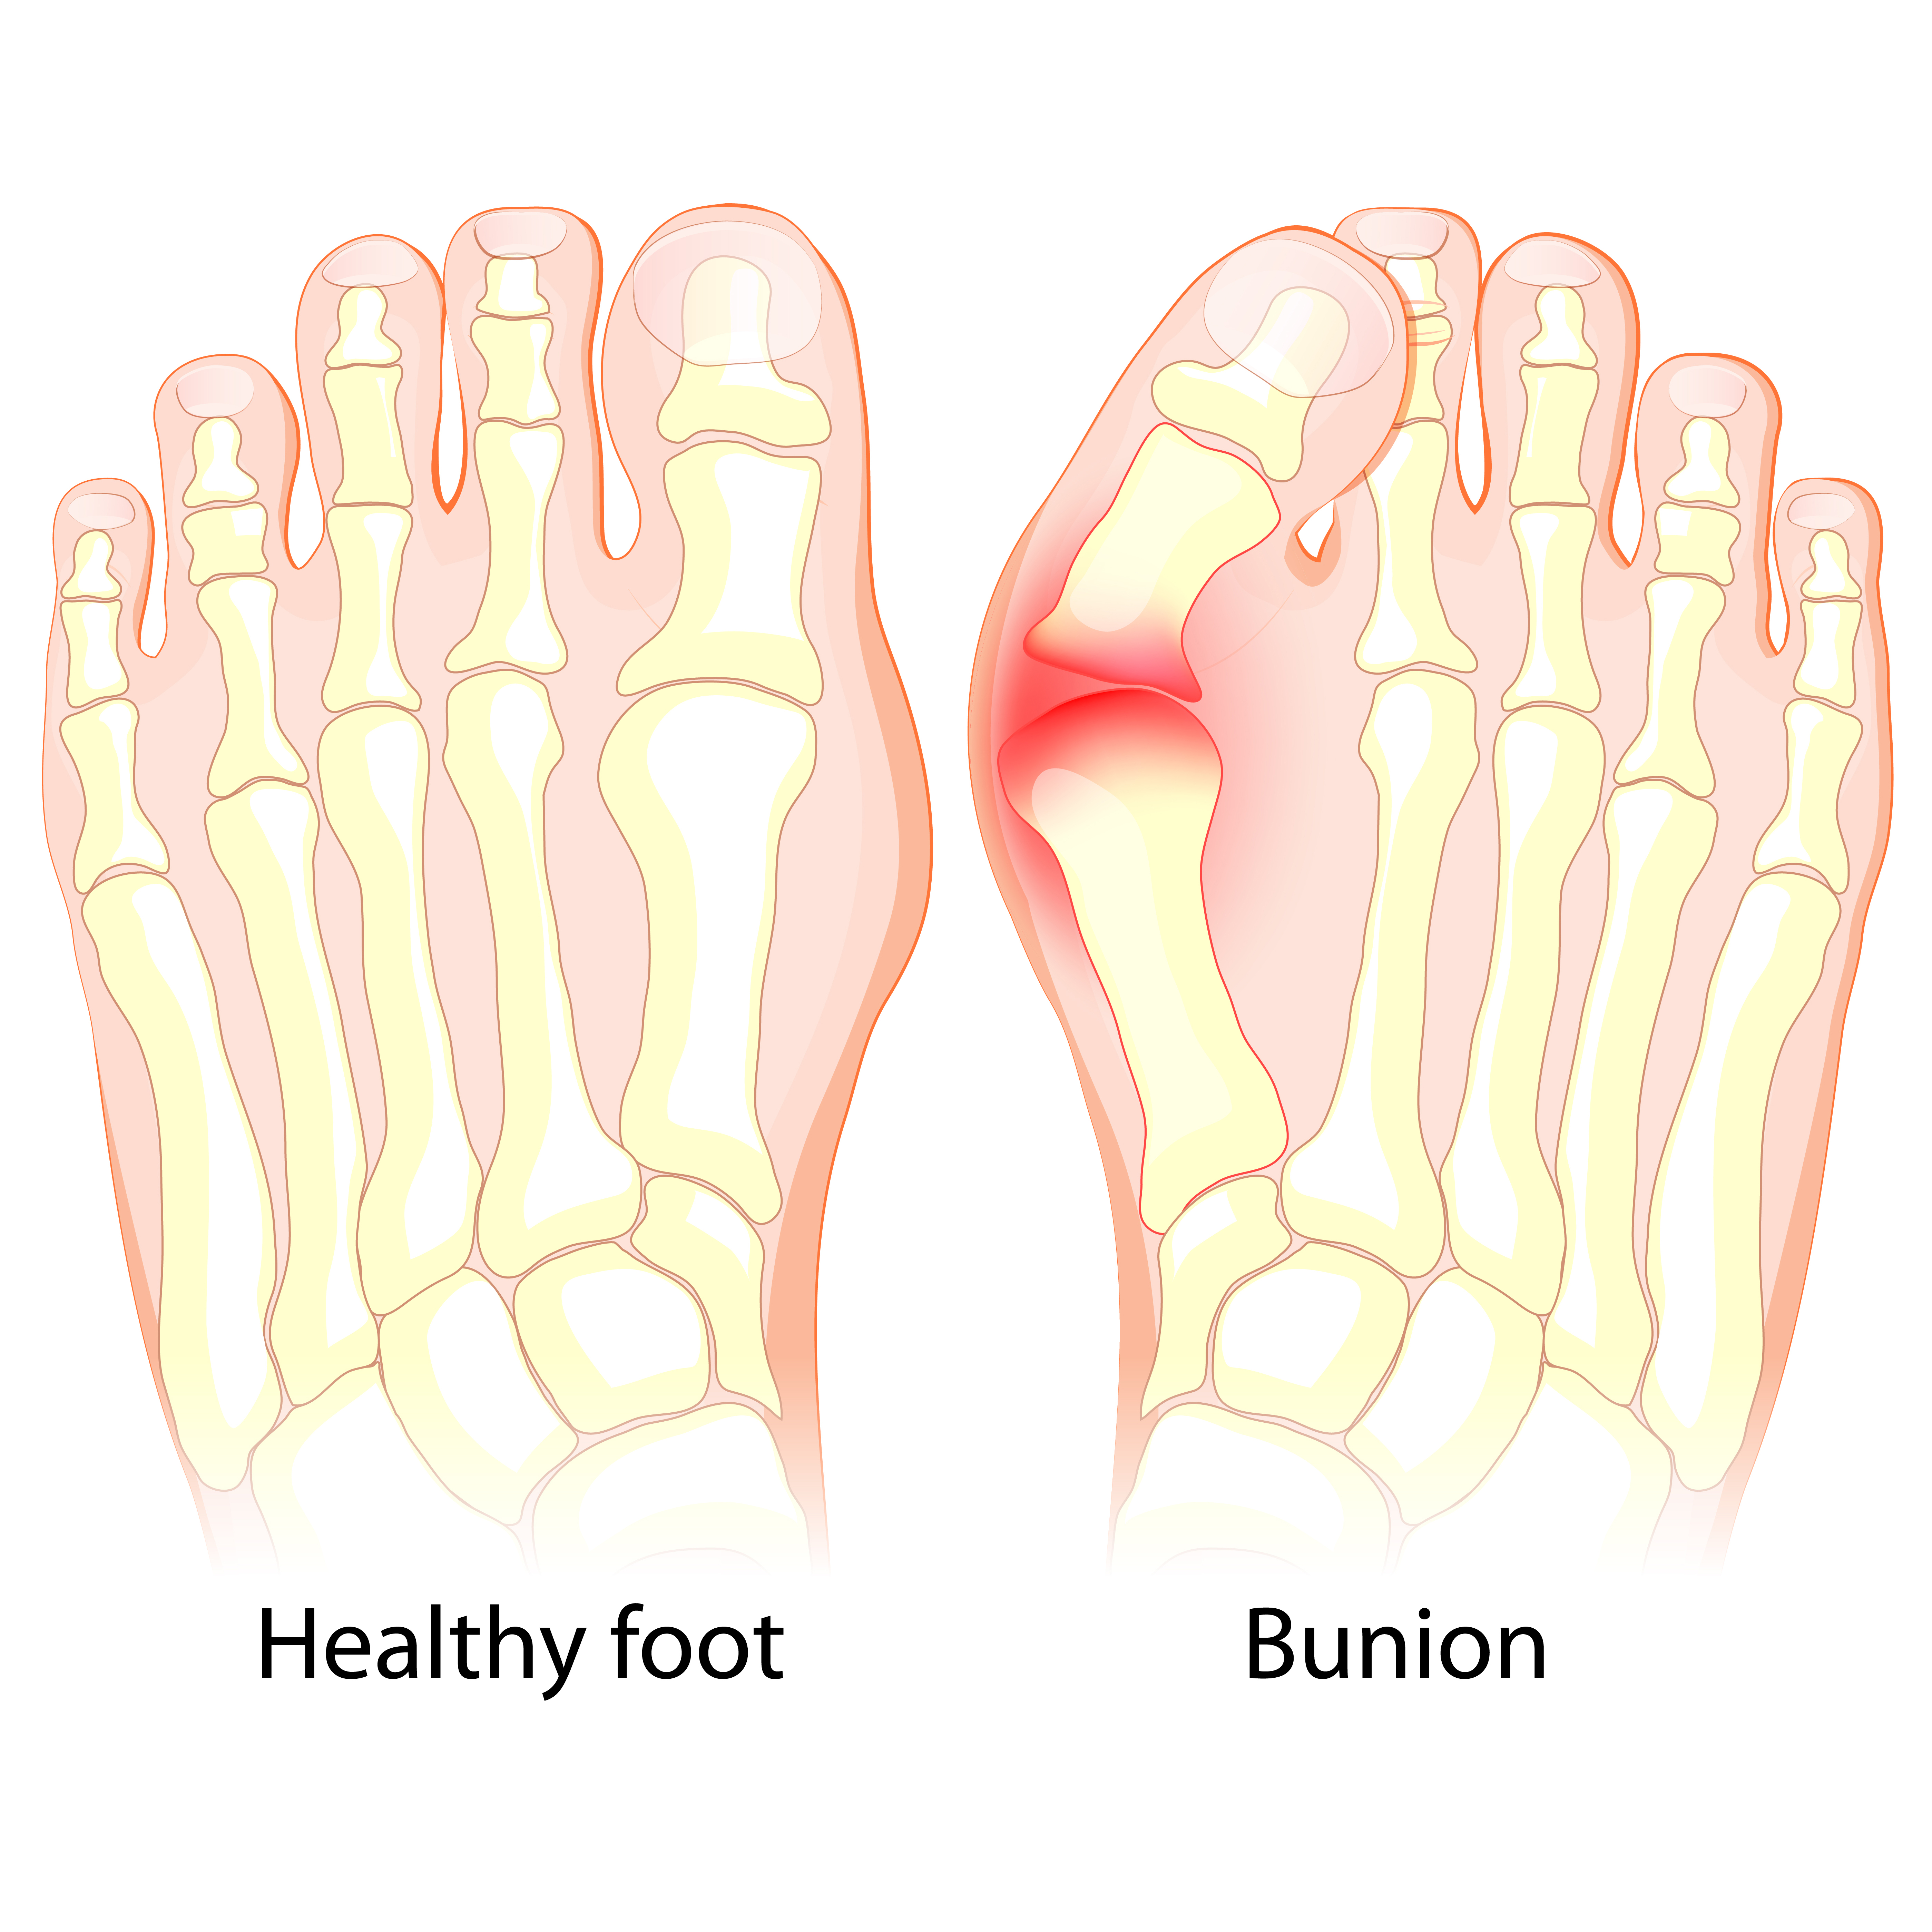 Healthy foot and foot with Bunion